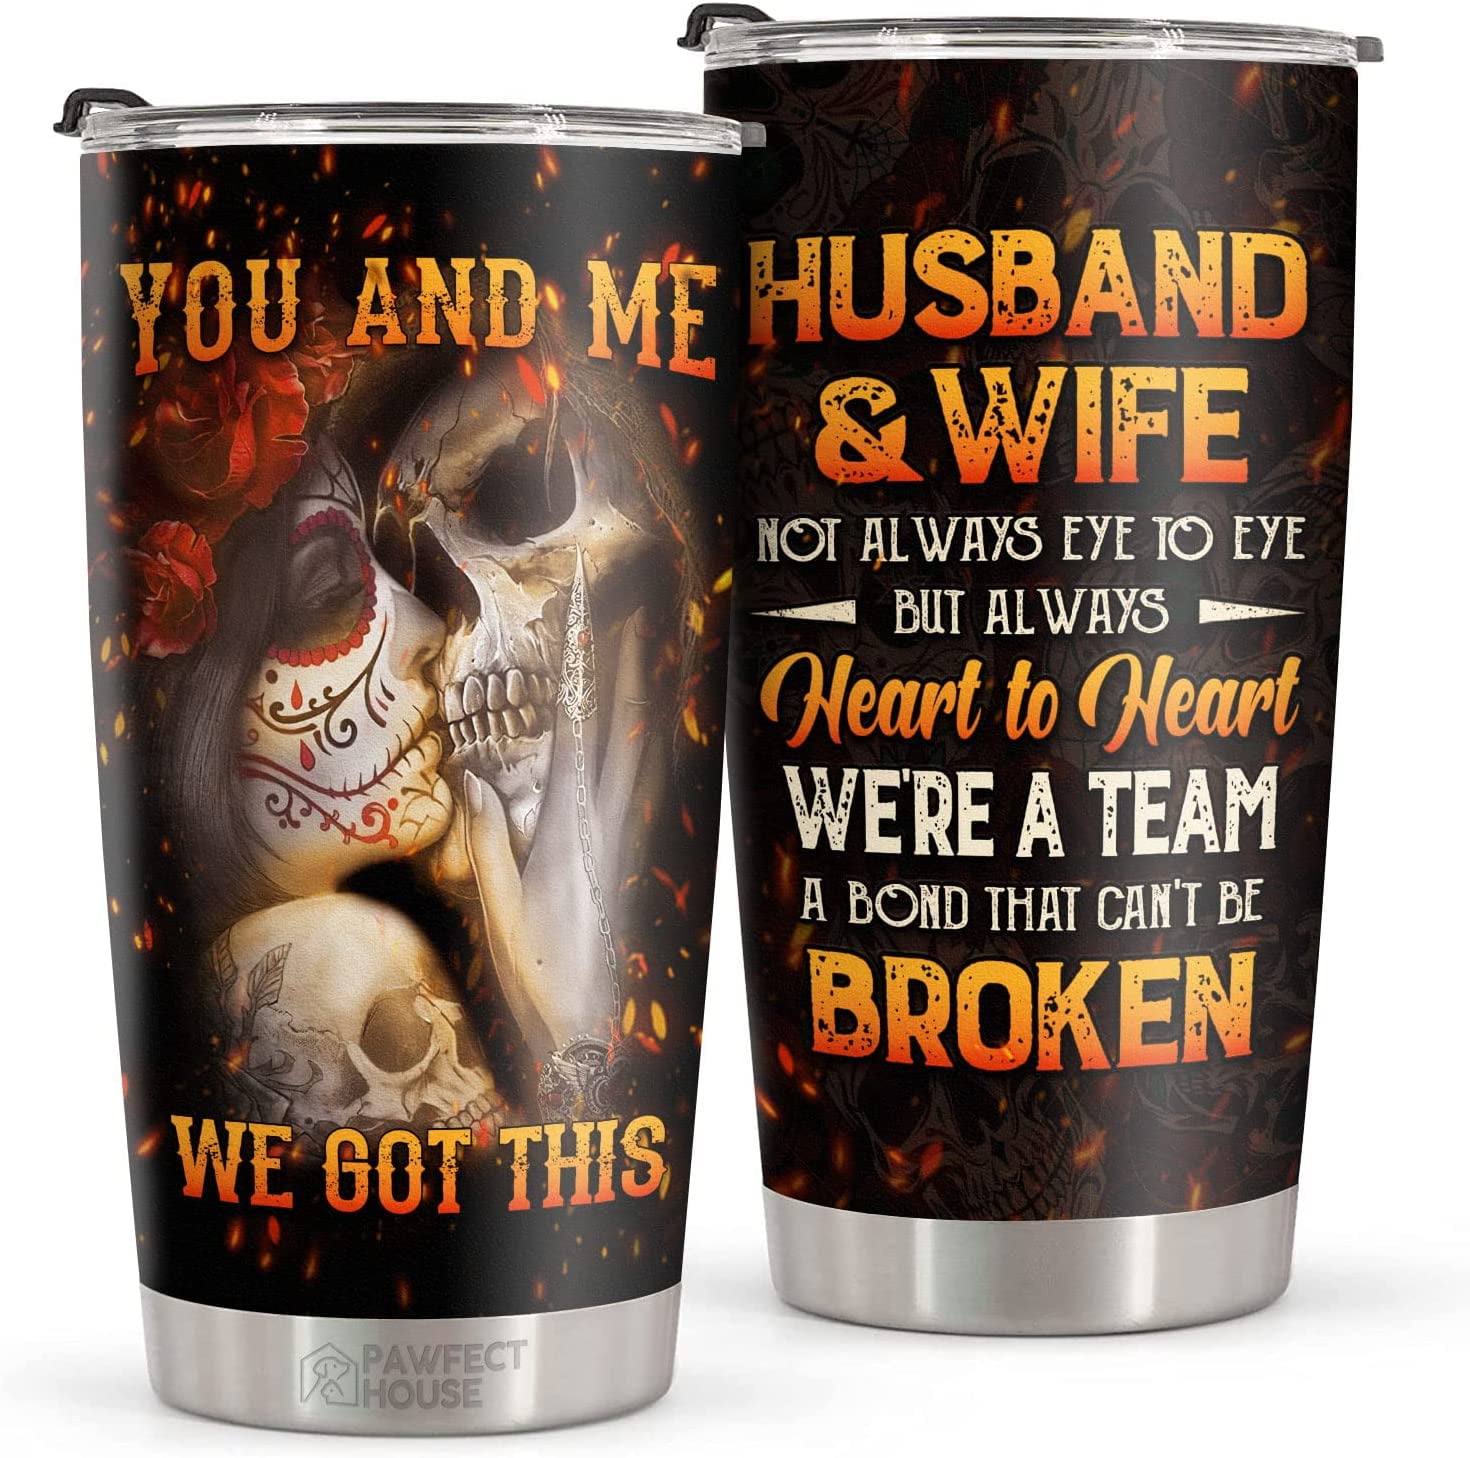 This gift set is a very unique and funny anniversary gift for your special  someone! Two stainless-steel …